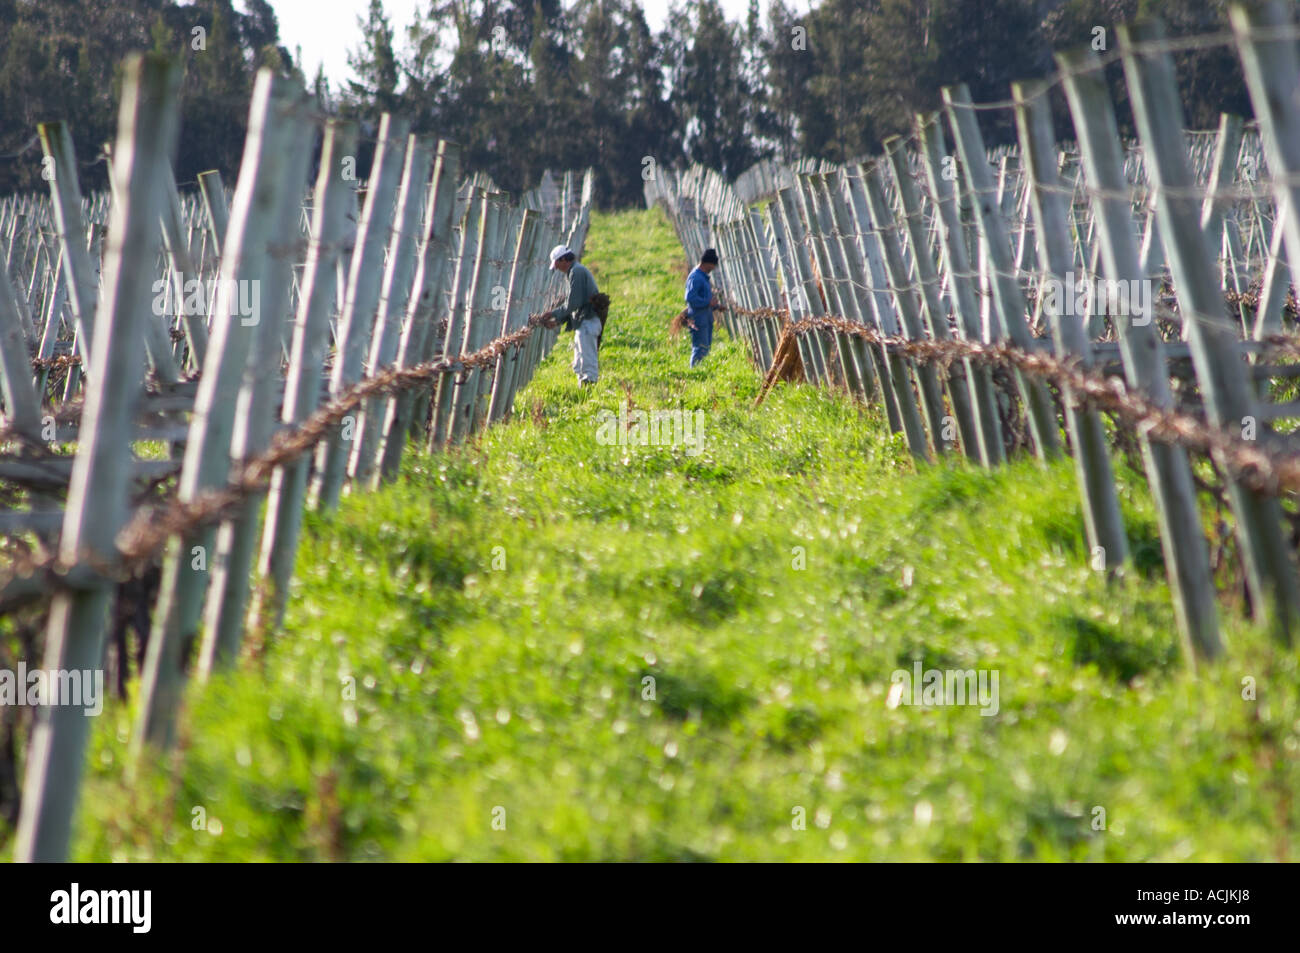 Two vineyard workers pruning the vines and tying up the branches. Vinedos y Bodega Filgueira Winery, Cuchilla Verde, Canelones, Stock Photo